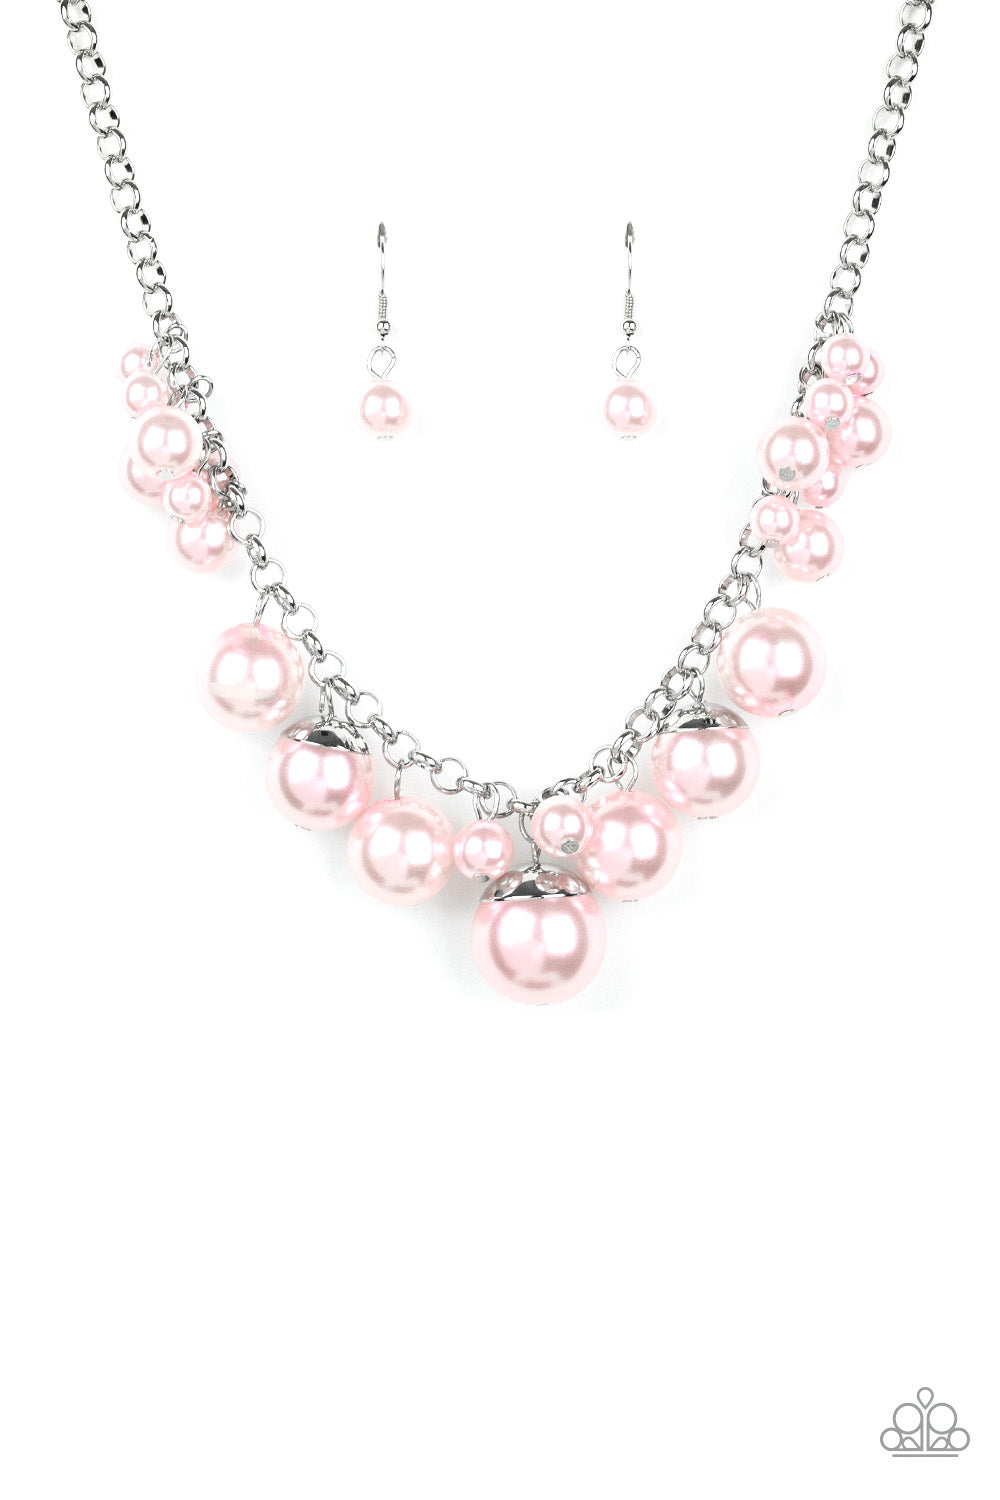 Broadway Belle - pink - Paparazzi necklace